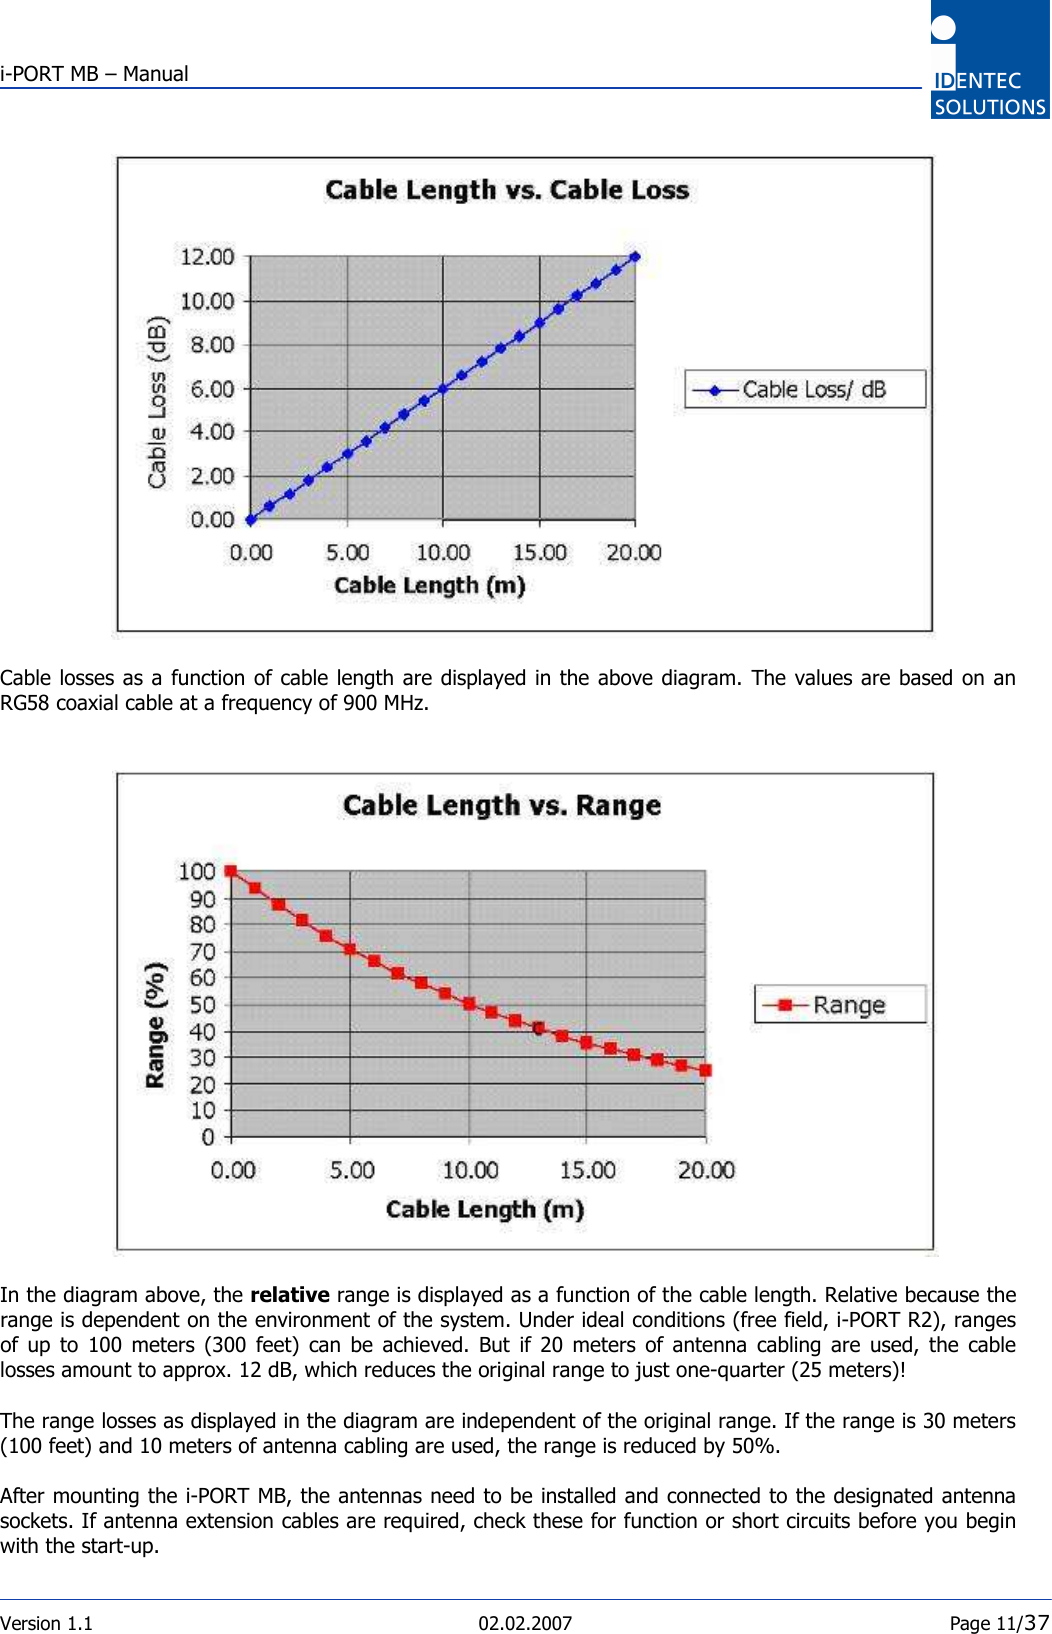  i-PORT MB – Manual  Version 1.1  02.02.2007  Page 11/37          Cable losses as a function of  cable length are displayed in the above diagram.  The values are based on an RG58 coaxial cable at a frequency of 900 MHz.            In the diagram above, the relative range is displayed as a function of the cable length. Relative because the range is dependent on the environment of the system. Under ideal conditions (free field, i-PORT R2), ranges of  up  to  100  meters  (300  feet)  can  be  achieved.  But  if  20  meters  of  antenna  cabling  are  used,  the  cable losses amount to approx. 12 dB, which reduces the original range to just one-quarter (25 meters)!   The range losses as displayed in the diagram are independent of the original range. If the range is 30 meters (100 feet) and 10 meters of antenna cabling are used, the range is reduced by 50%.  After mounting the i-PORT MB, the antennas need to be installed and connected to the designated antenna sockets. If antenna extension cables are required, check these for function or short circuits before you begin with the start-up. 